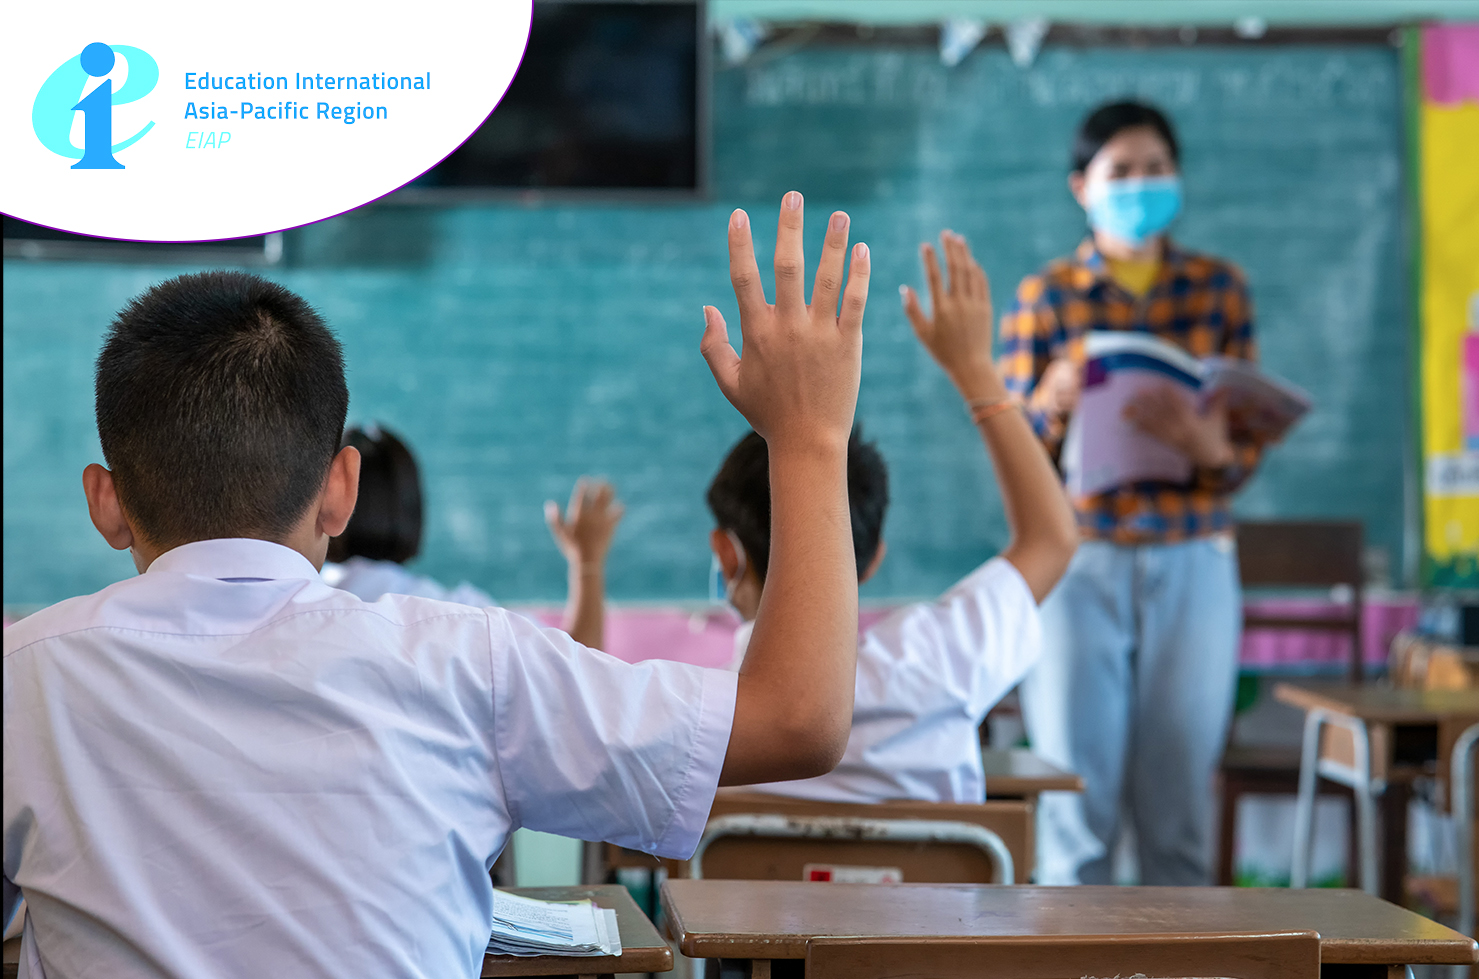 Regional Webinar and Launch of EIAP–ILO Report on The Impact of the COVID-19 Pandemic on Education and Teaching in Asia-Pacific